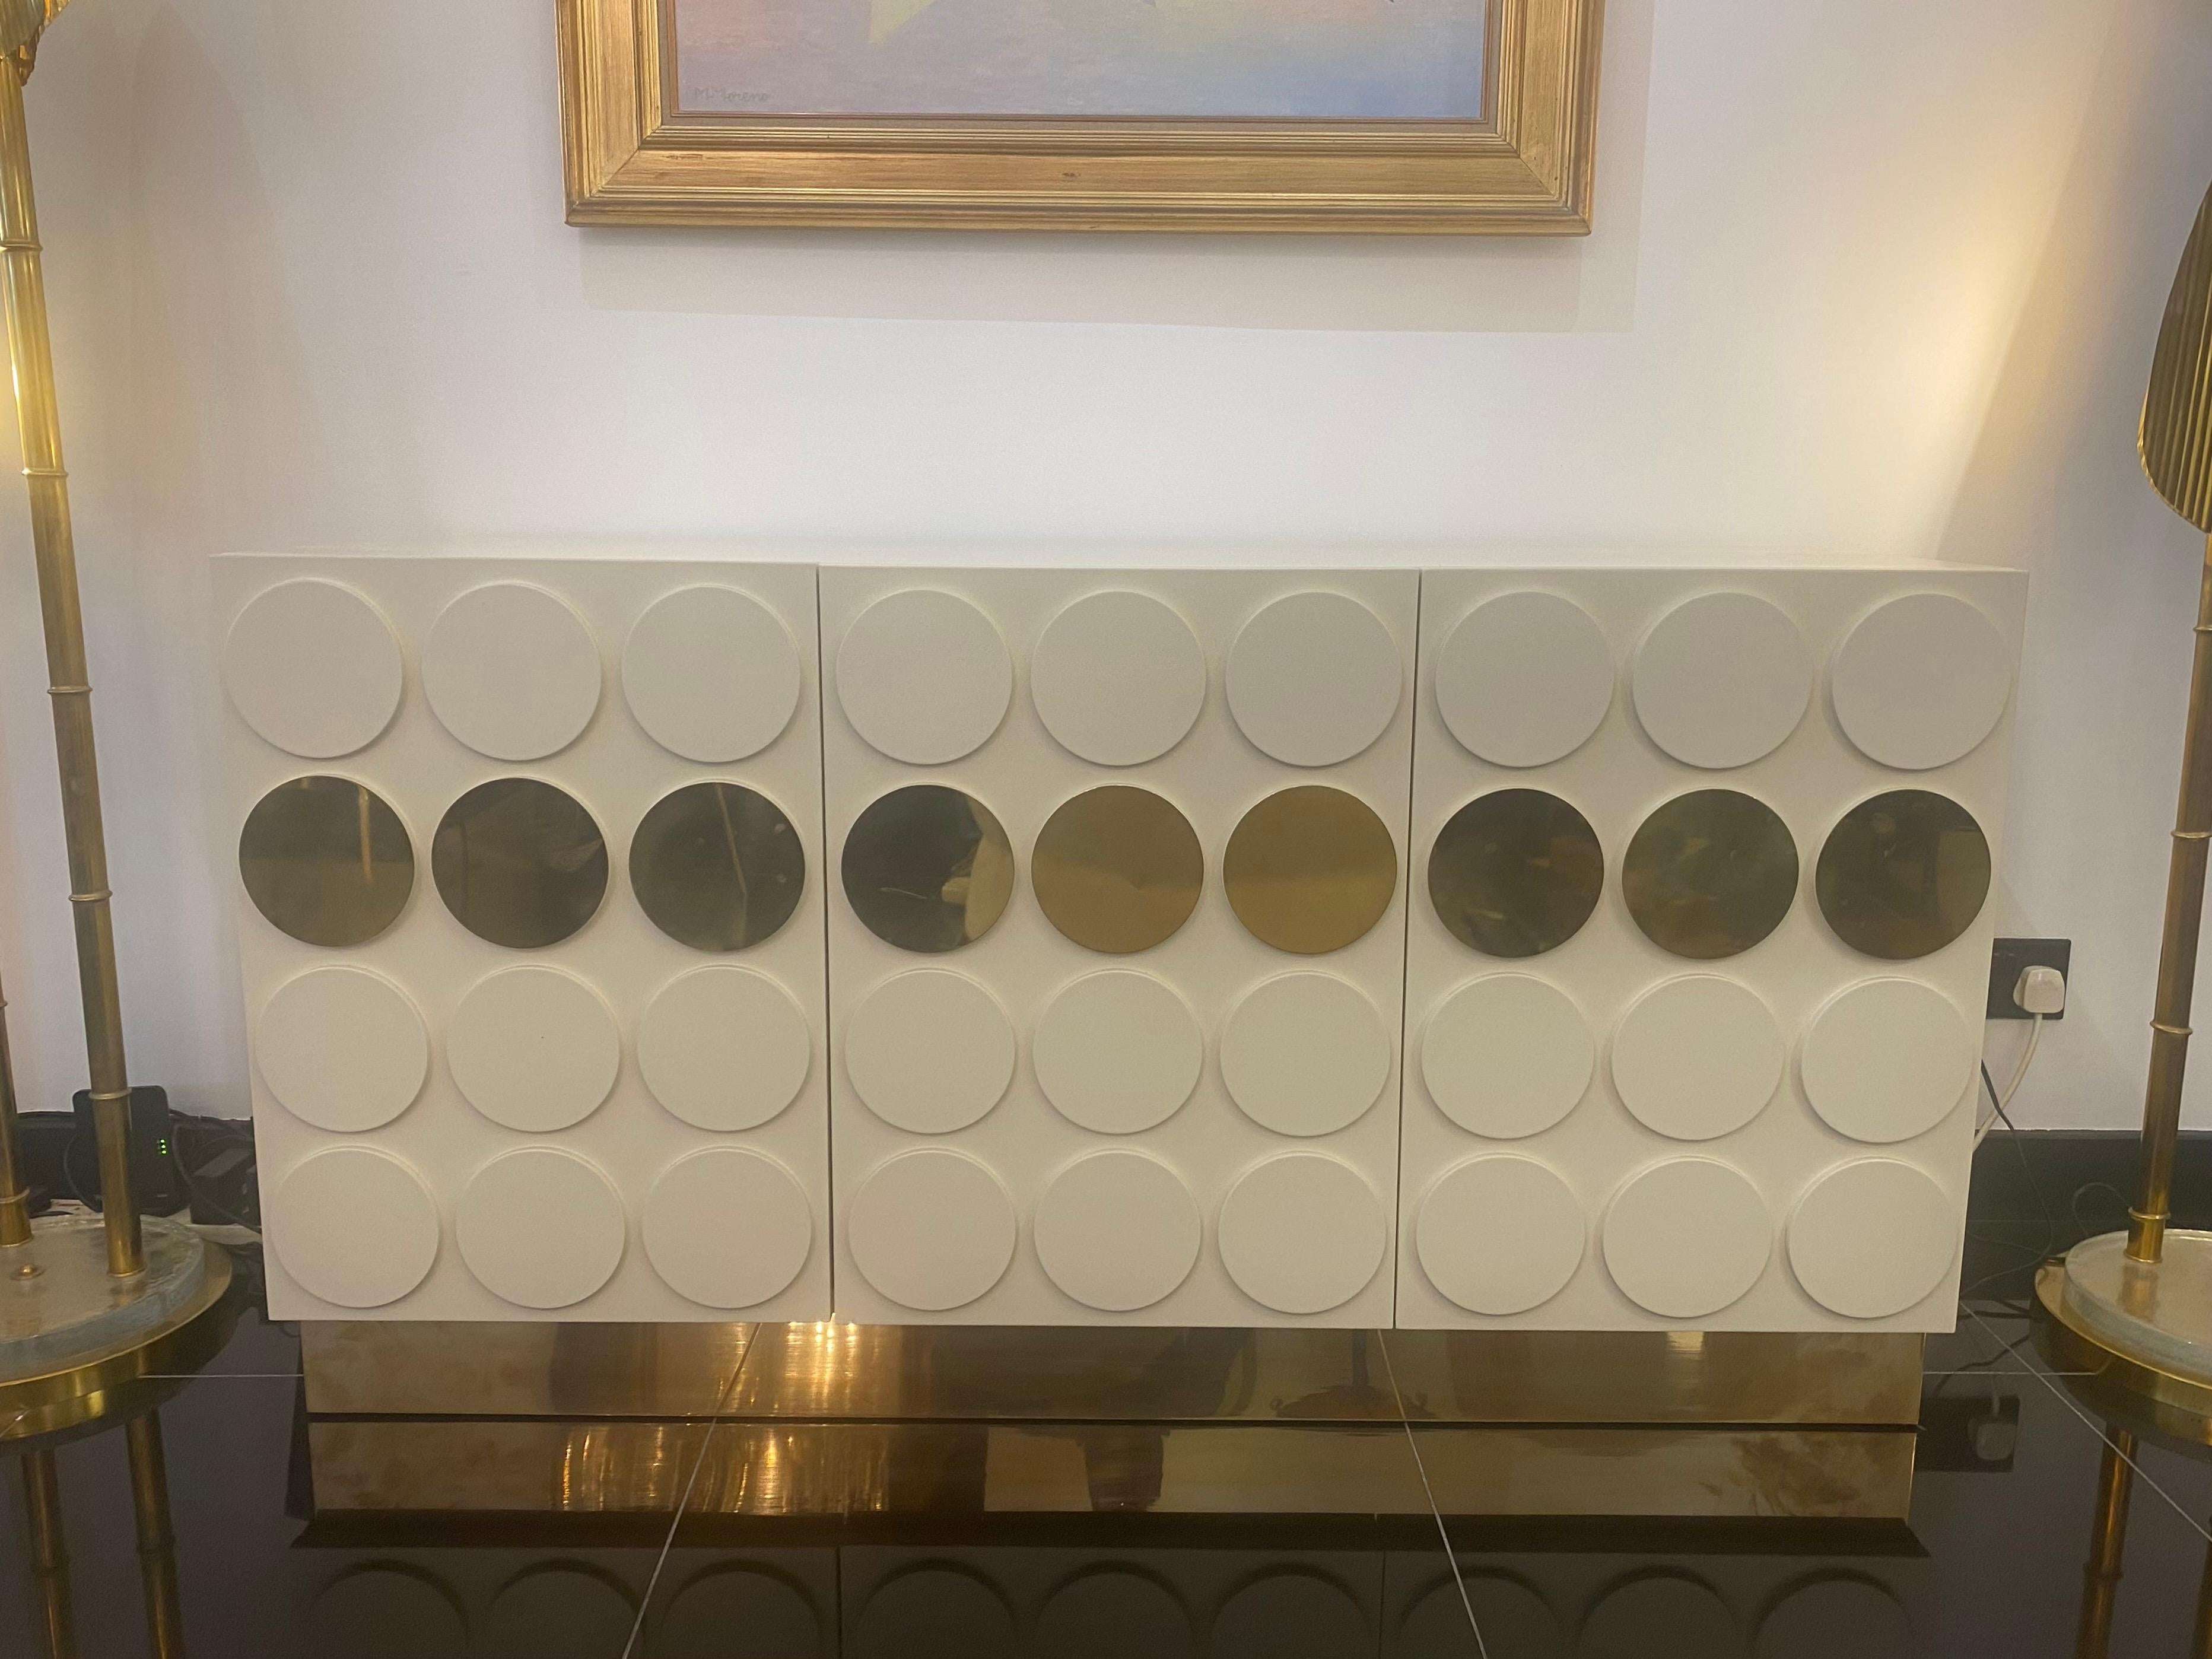 An Italian cabinet 3 door cabinet designed with raised circles in white pickle lacquer and brass on all three sides. There is a single shelf in natural wood on both sides with brass piping. The cabinet stands on a glamorous brass surround base.